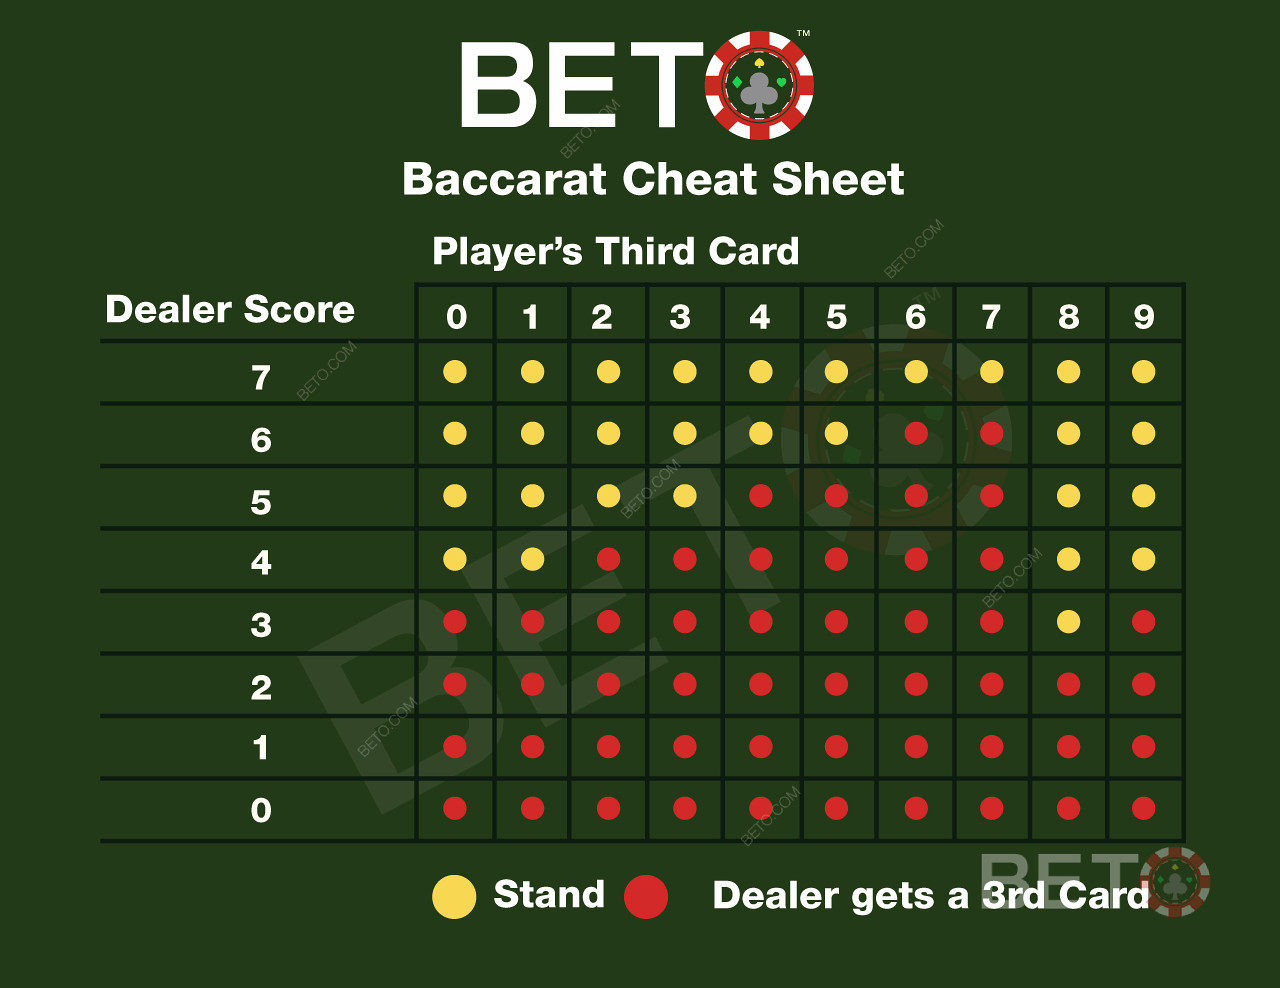 Baccarat cheat sheet and chart of rules